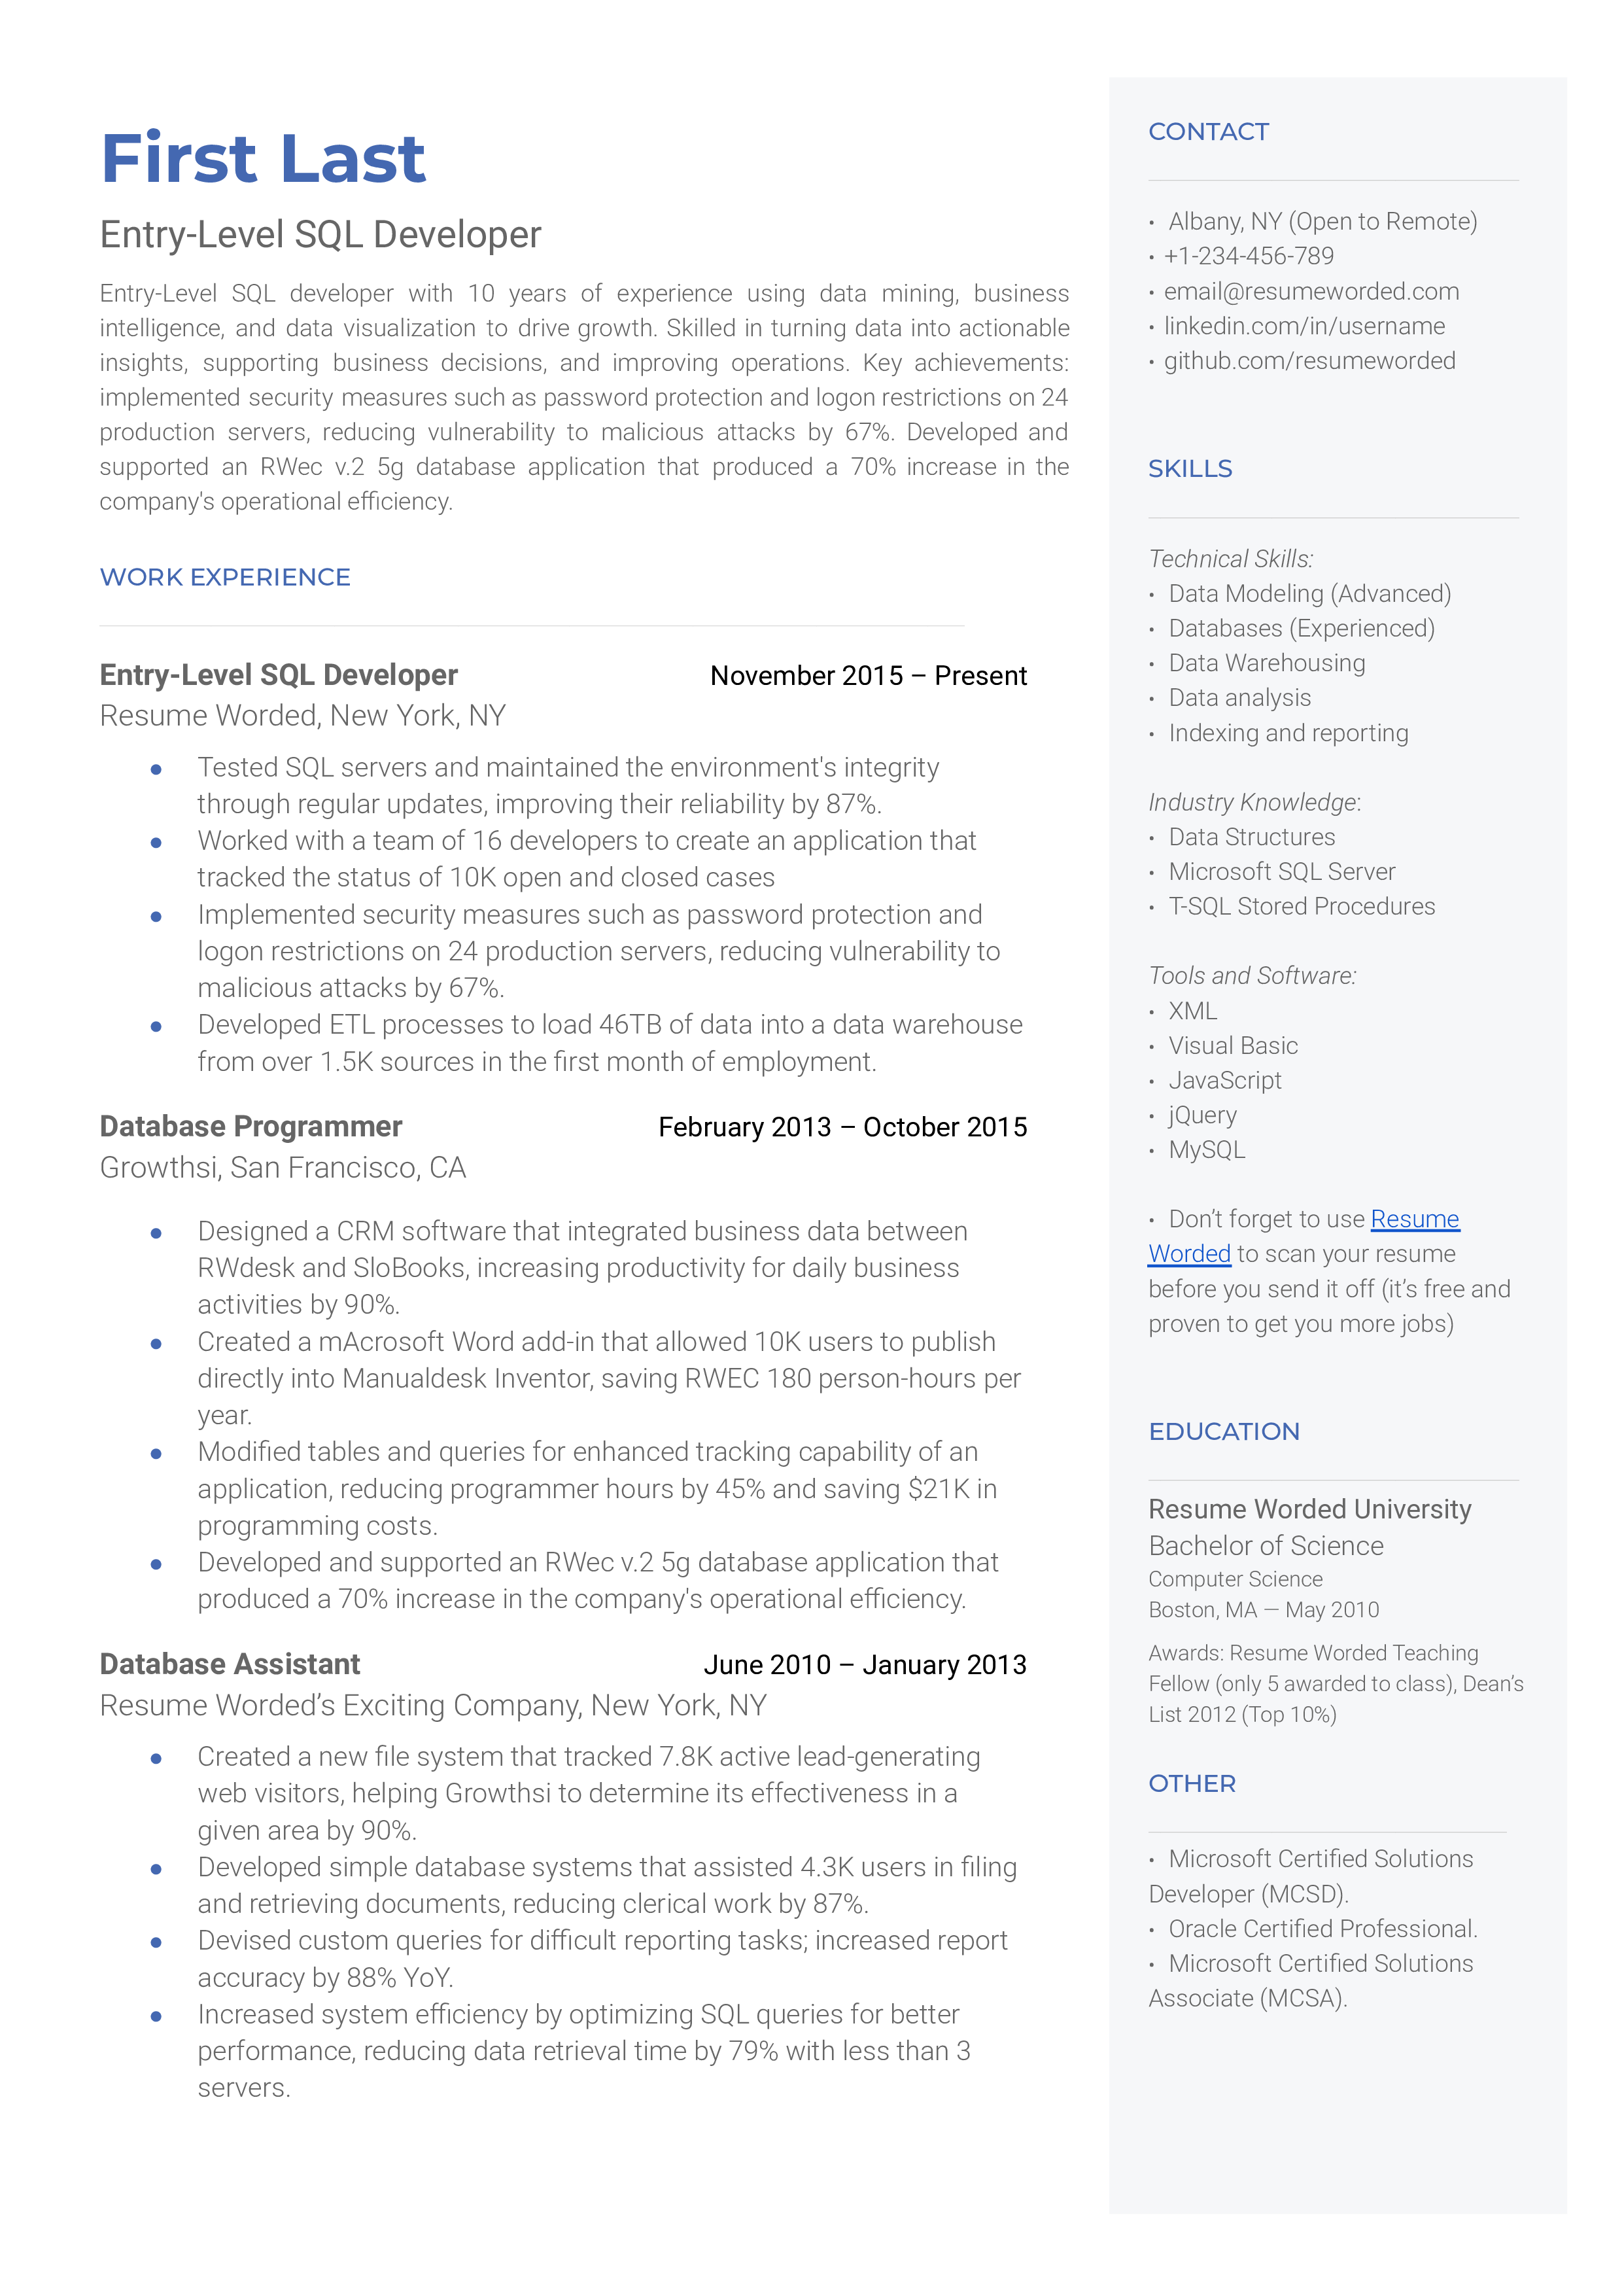 An entry-level SQL developer resume sample that highlights the applicant’s certifications and key achievements.